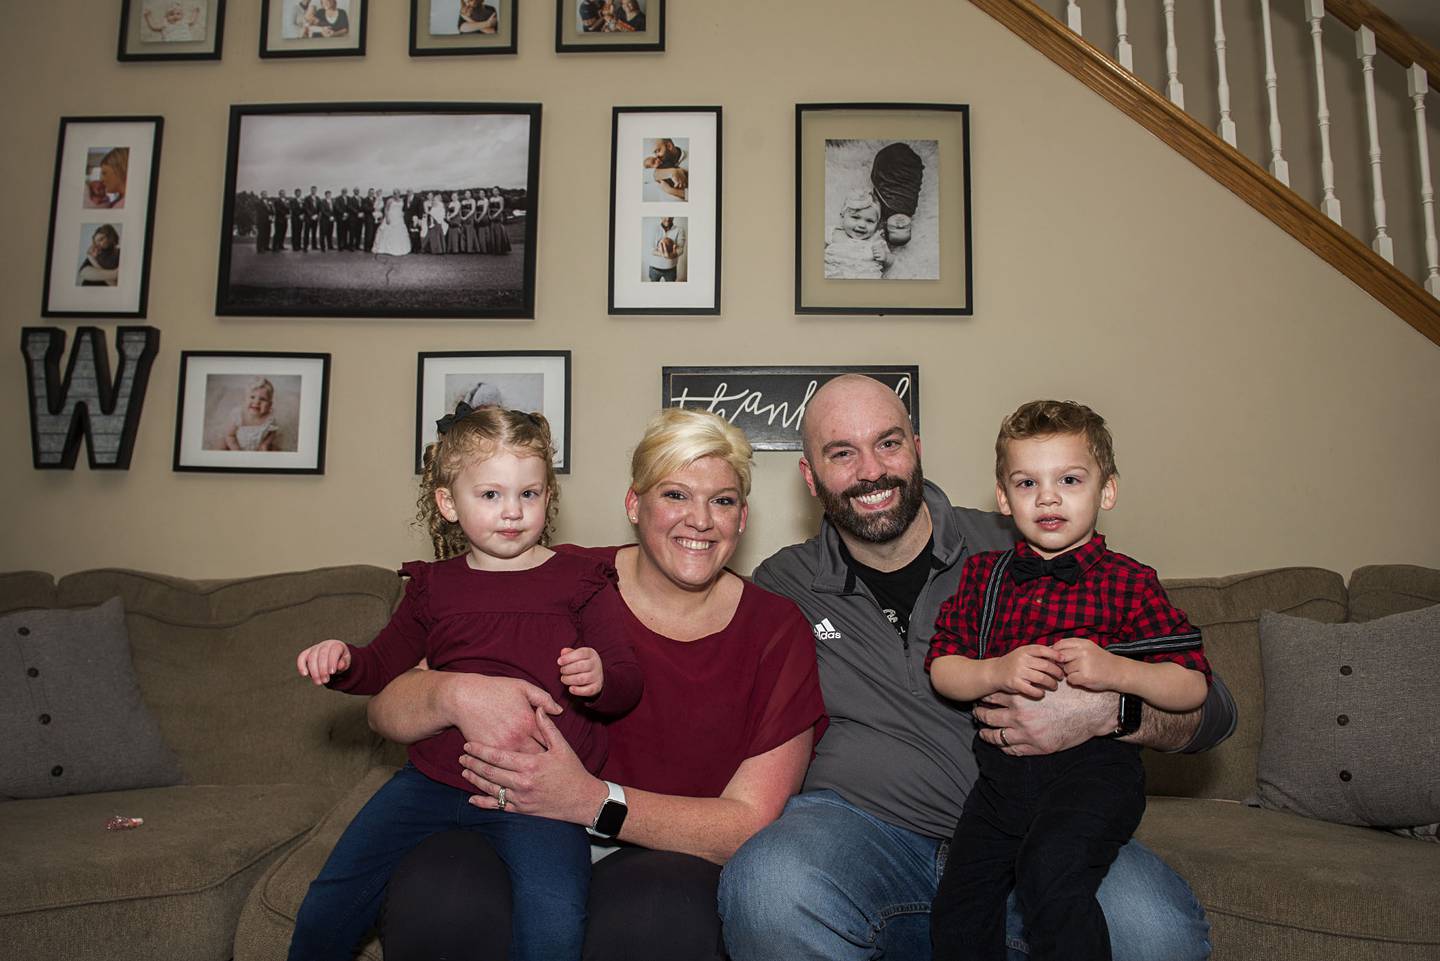 Jennifer, with husband Ryan Westphal and children Lois, 3, and Zachary, 2. Lois is the first baby ever to be born with this system.